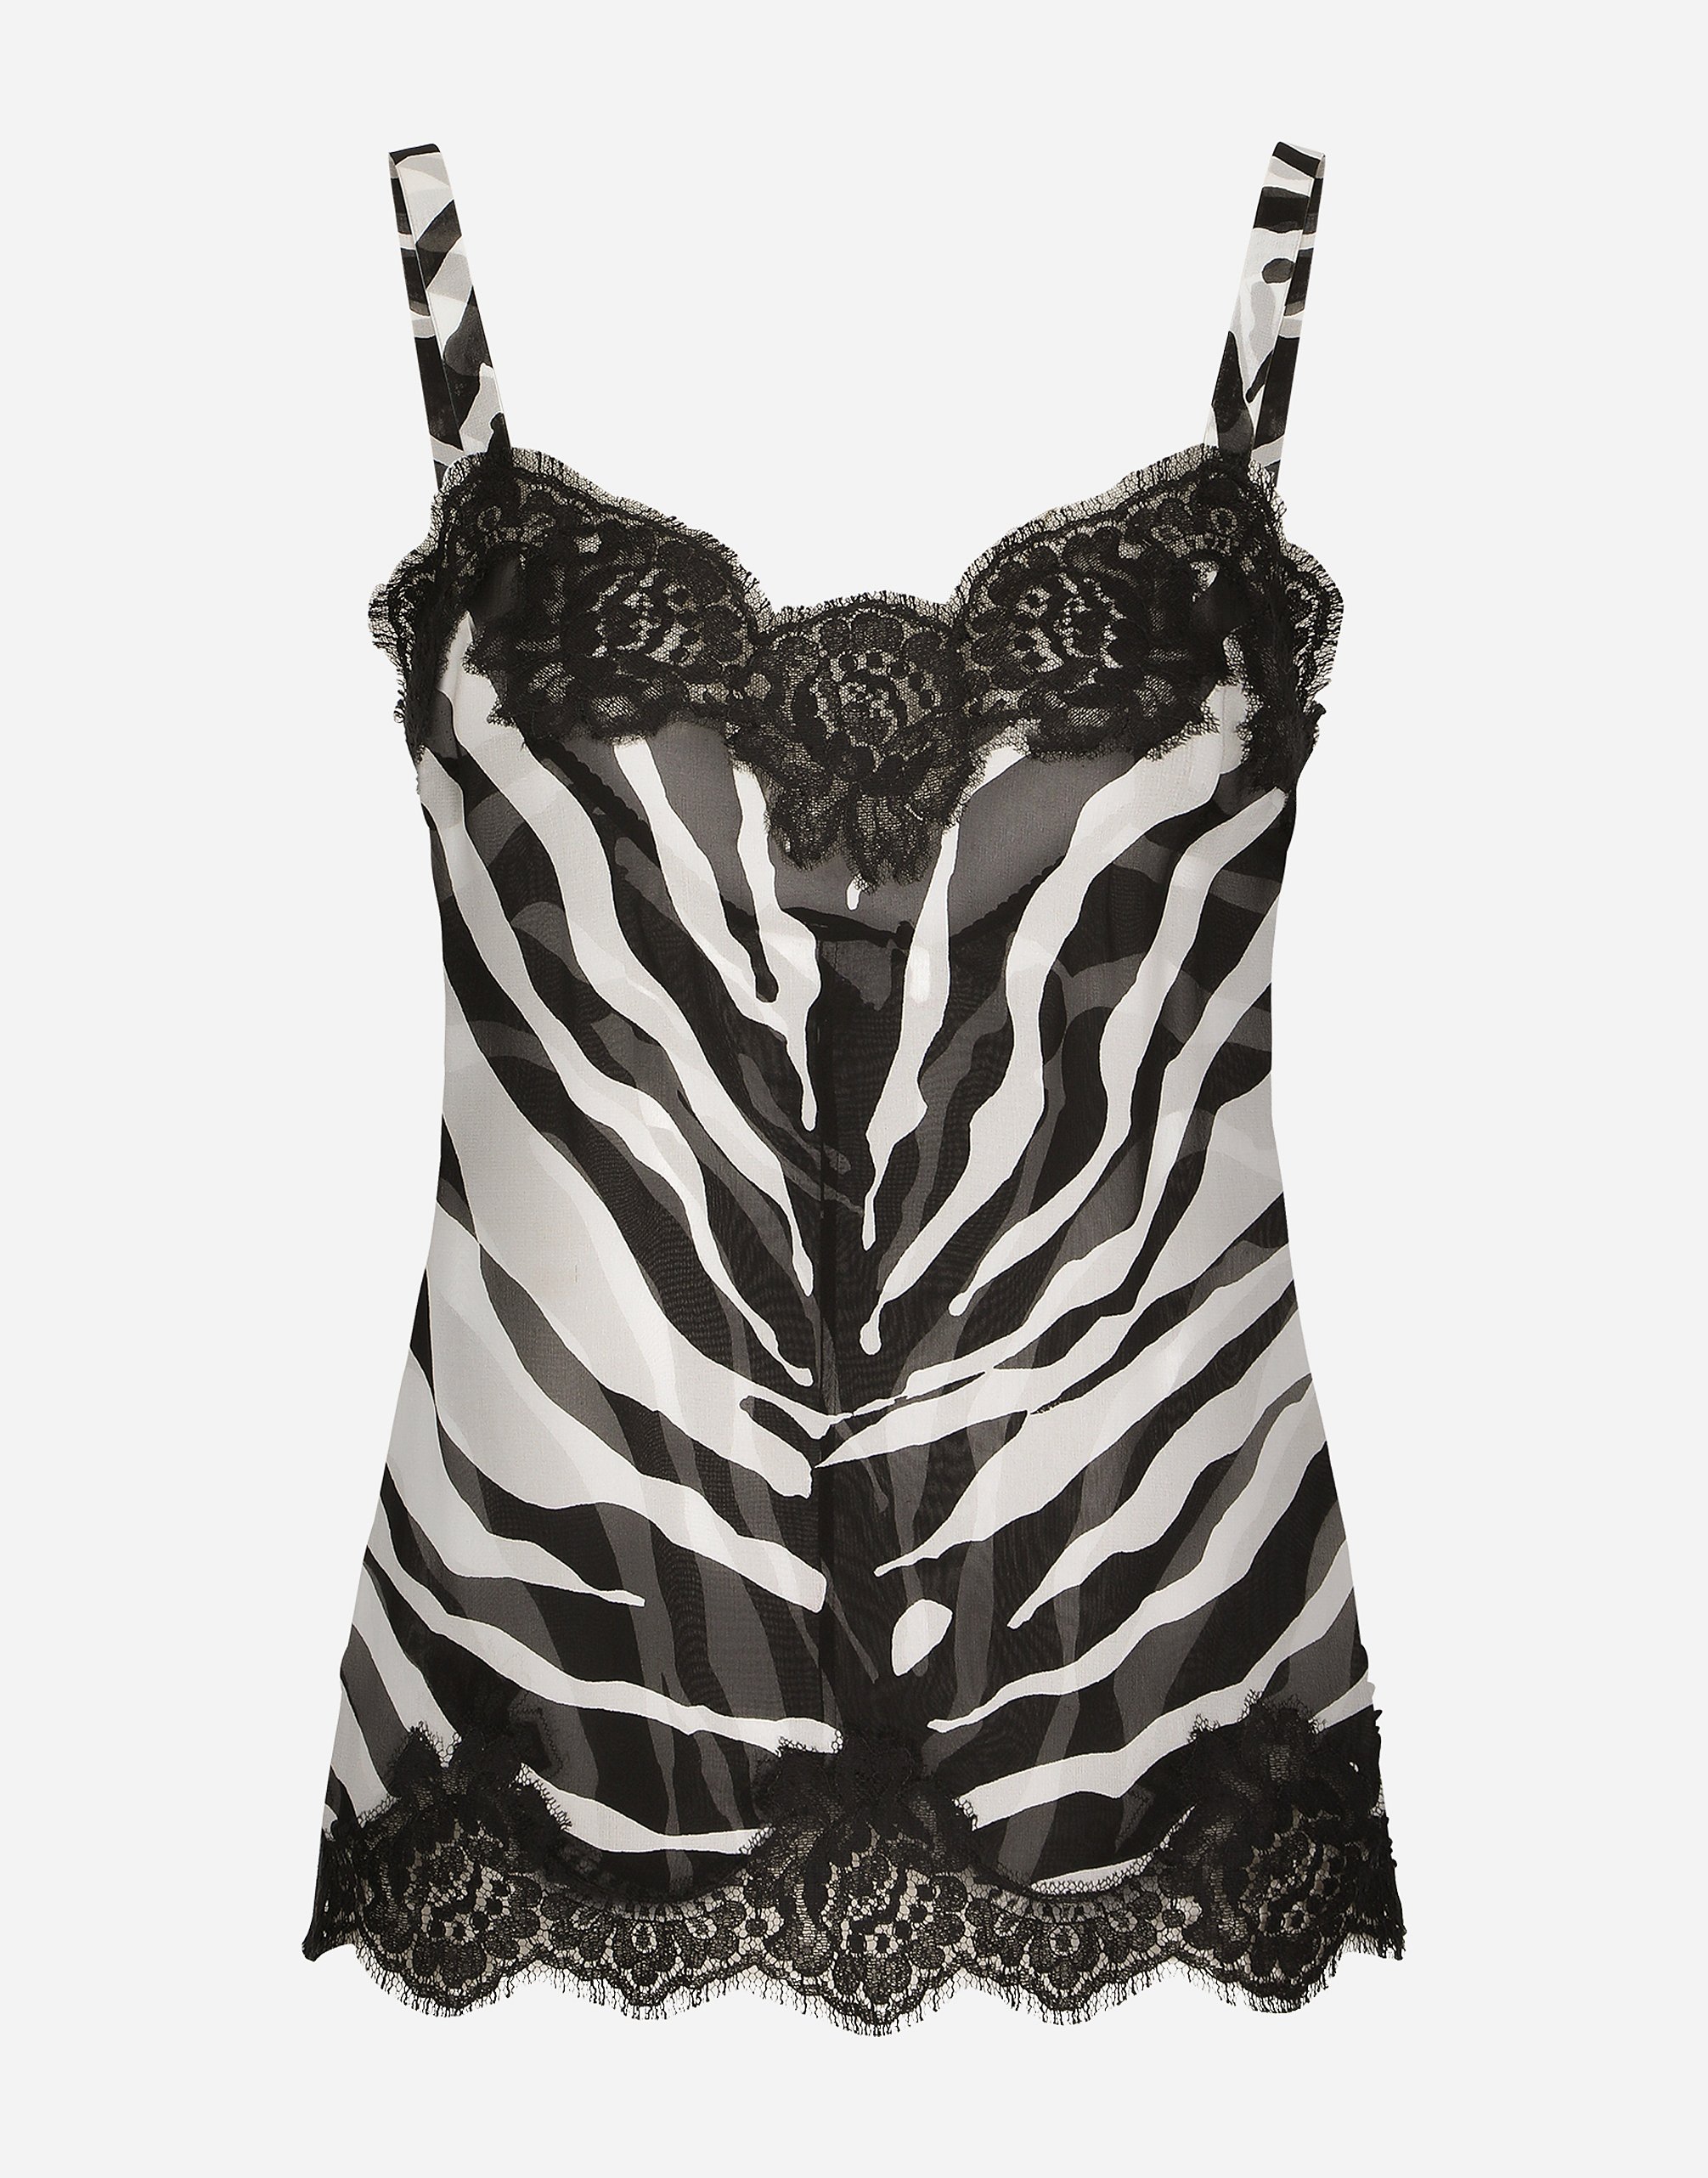 DOLCE & GABBANA Zebra-print chiffon lingerie-style top with lace detailing